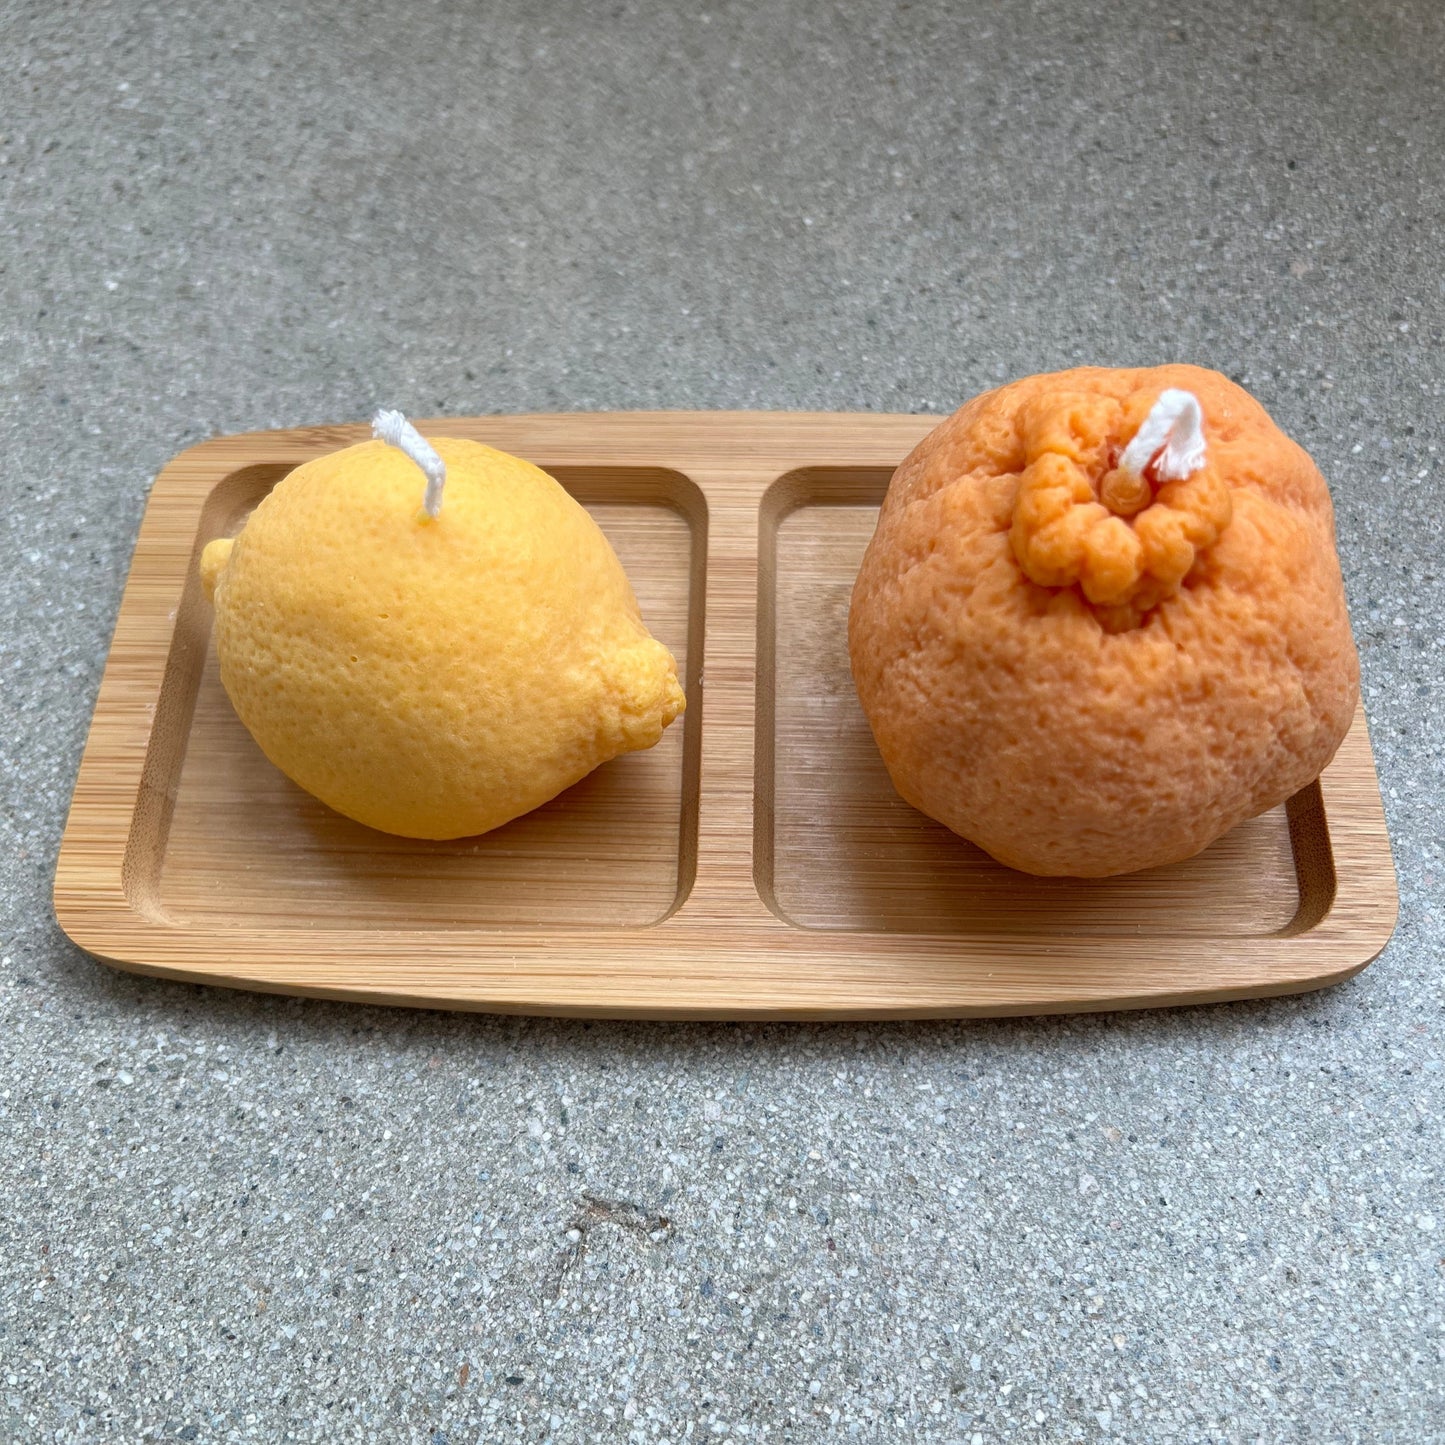 Wooden tray with two side by side, separate compartments. Each compartment is holding a candle, on the left a lemon and on the right, an orange. 